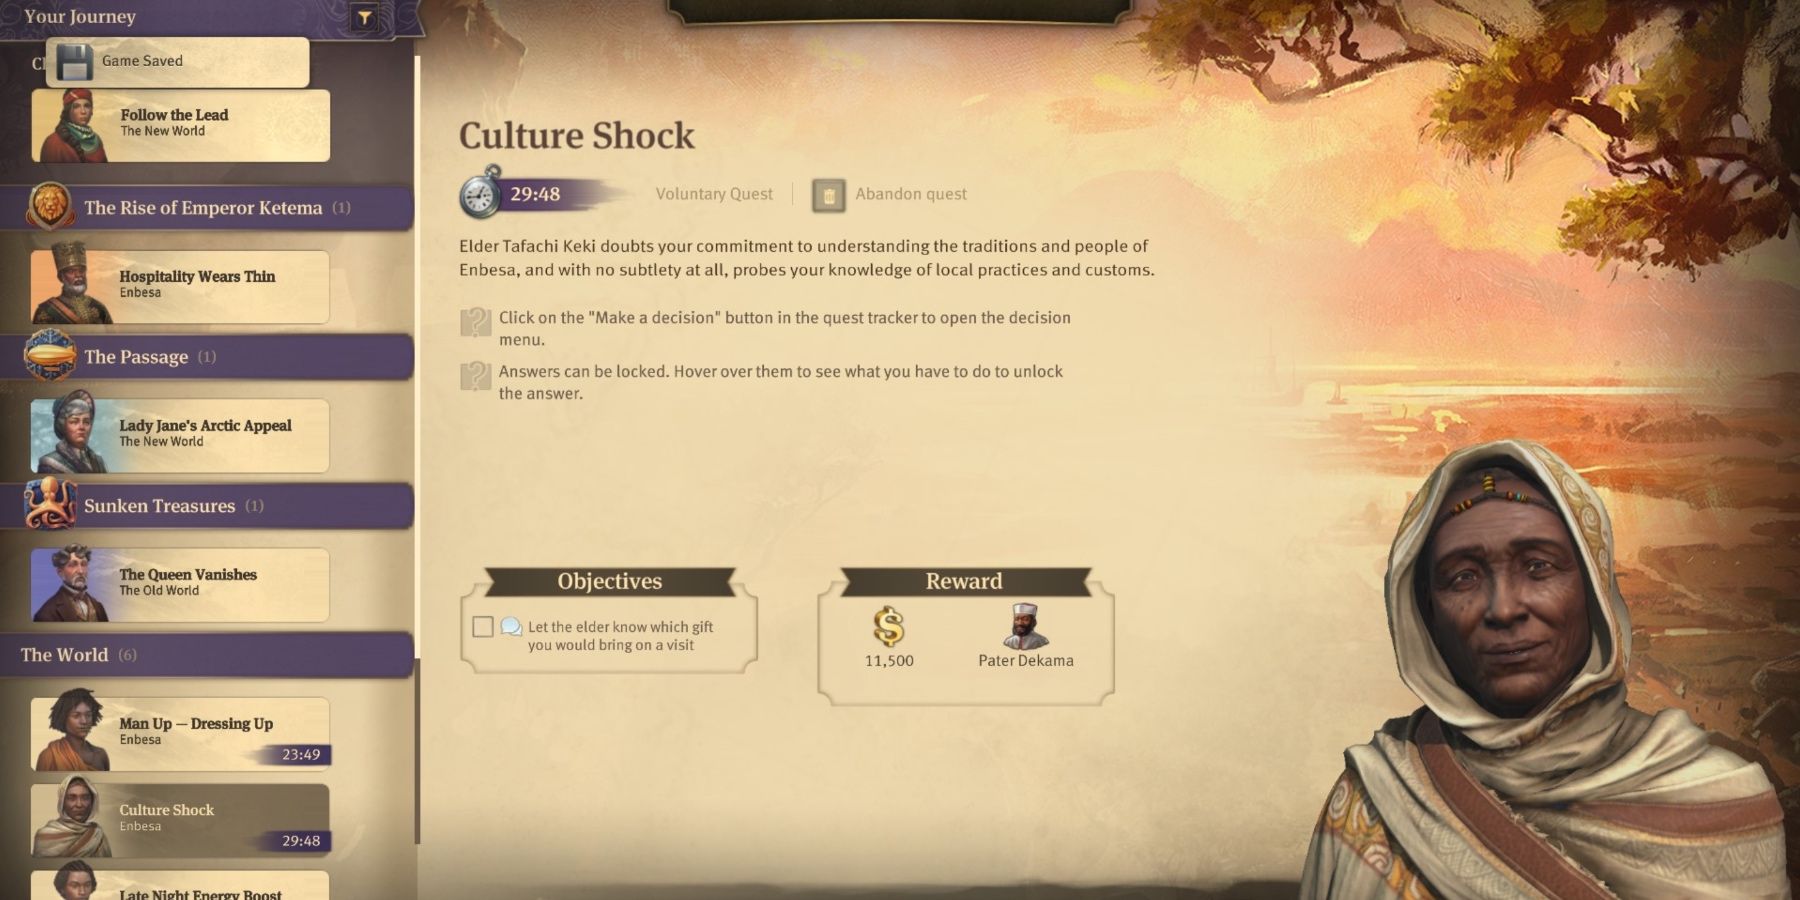 A screen showing a quest which will earn the player 11500 dollars